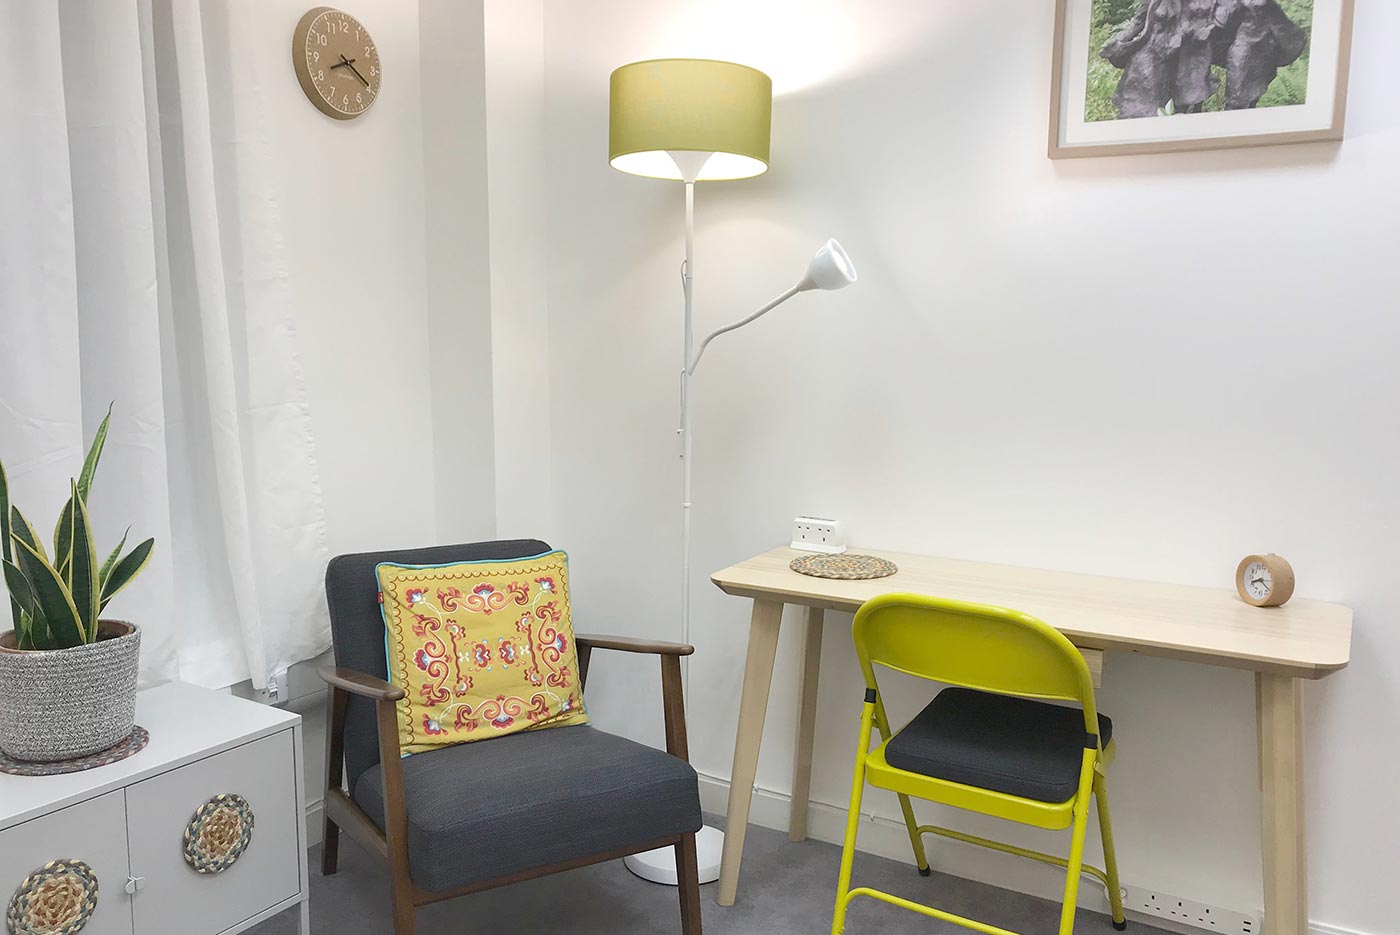 King's Cross Road Room 102: armchair, desk, chair, lamp, picture